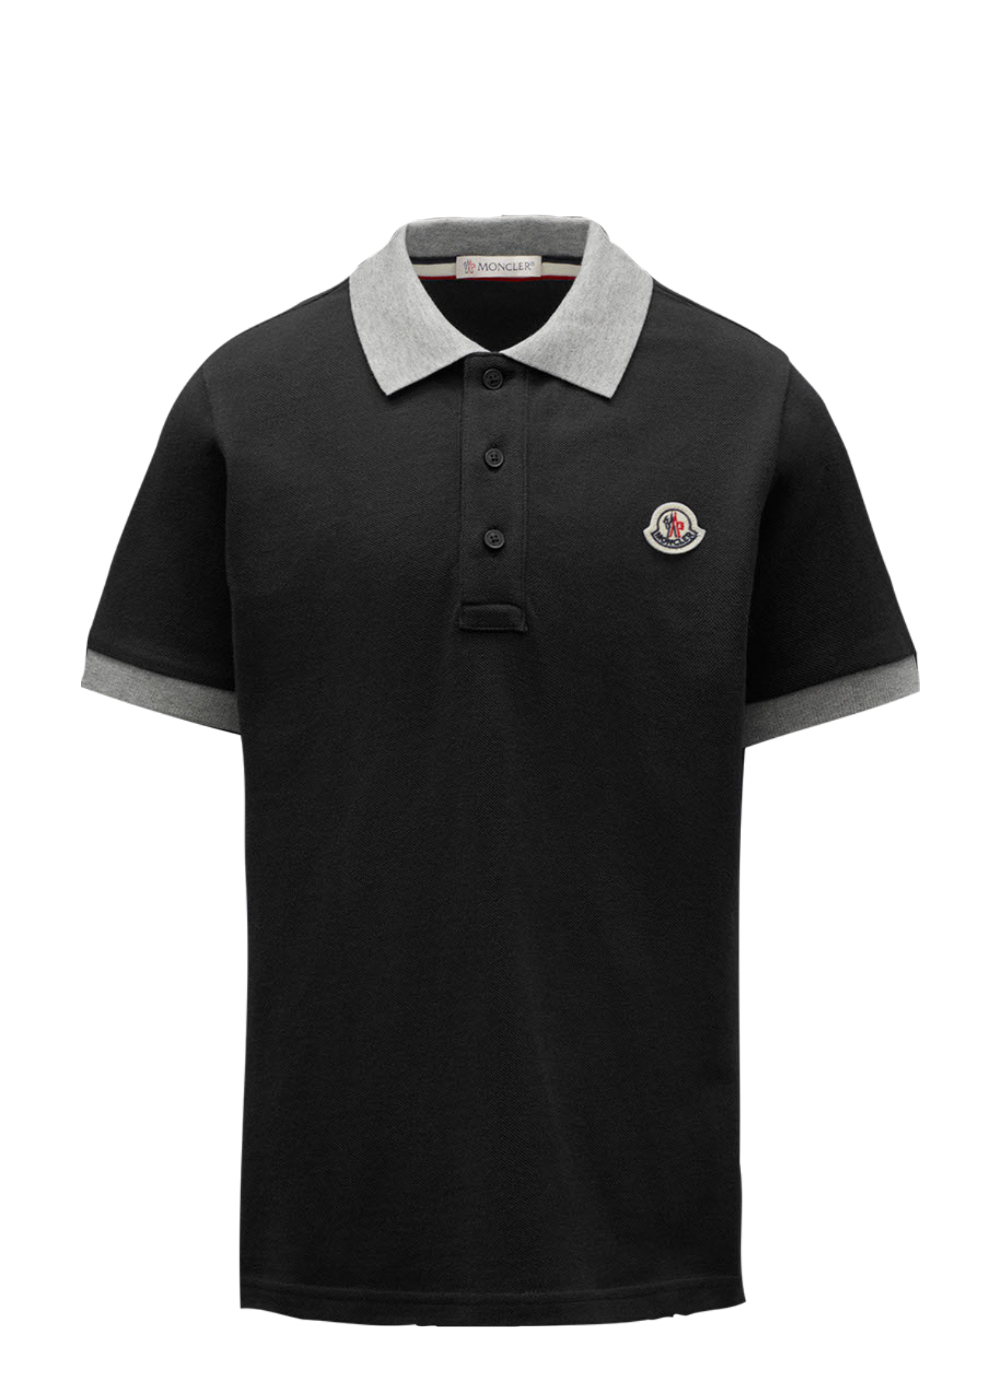 Featured image for “MONCLER POLO BAMBINO”